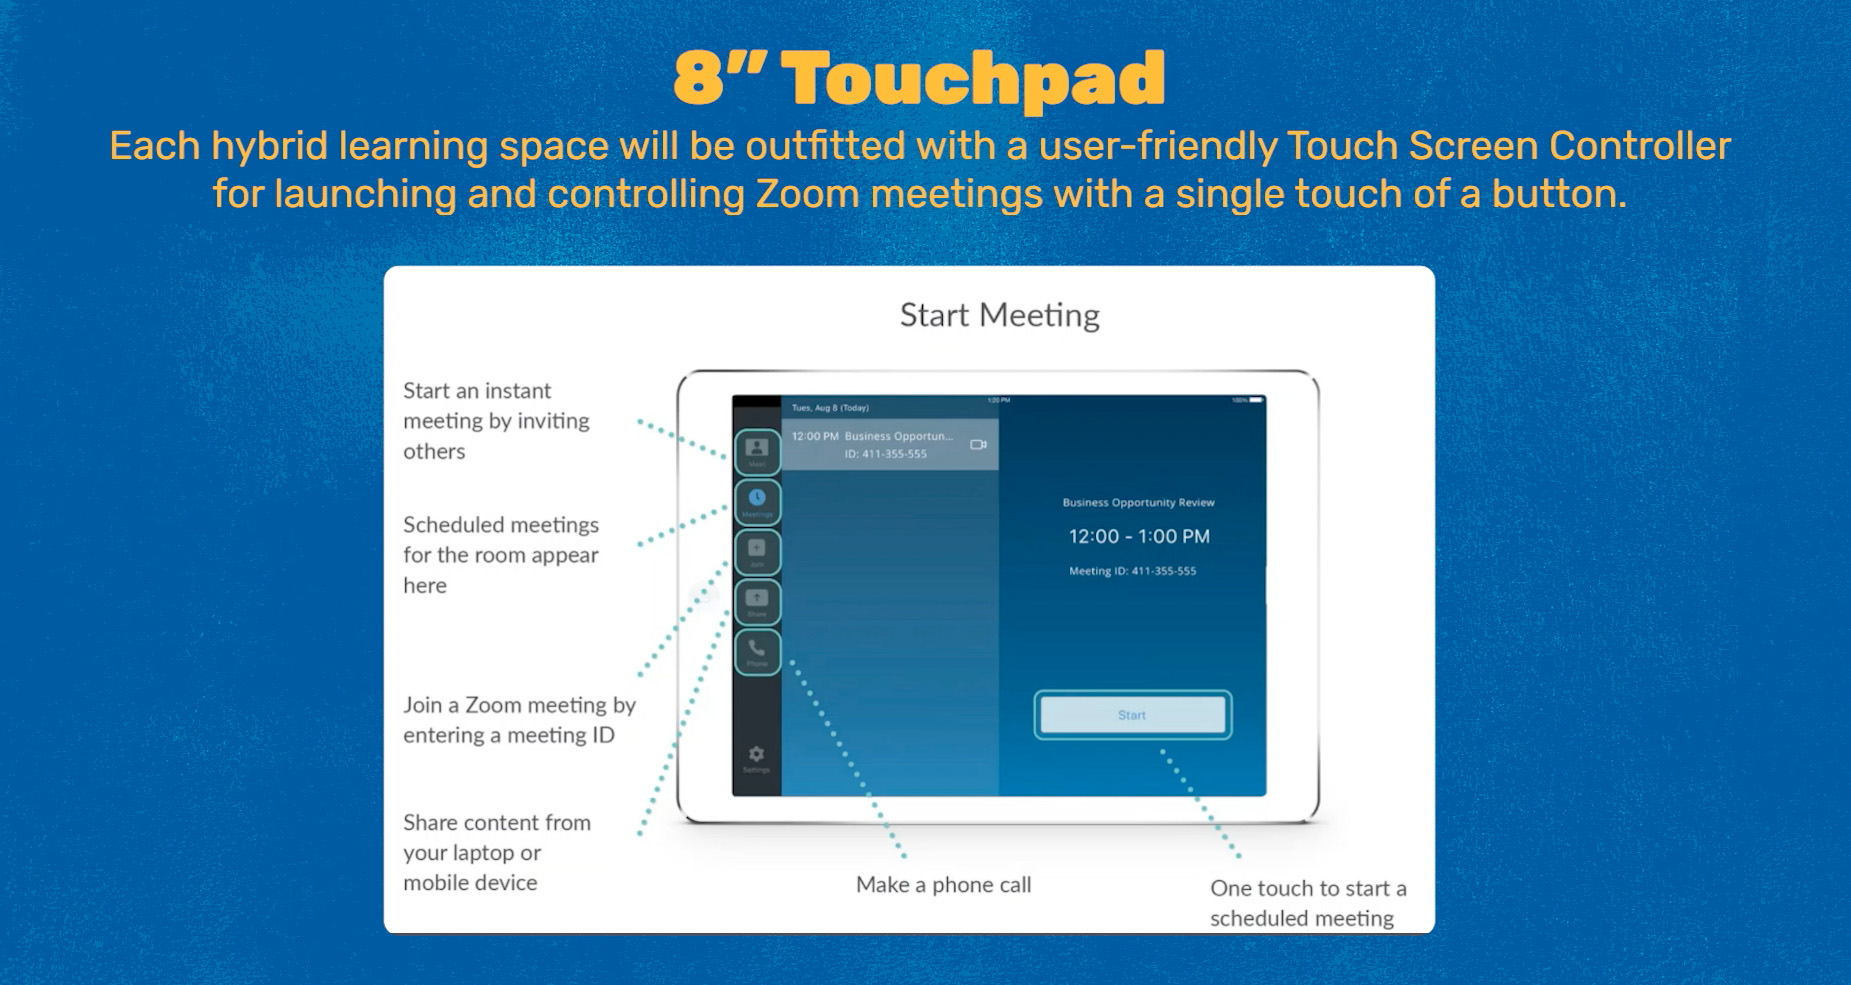 Description of Zoom Room touchpad